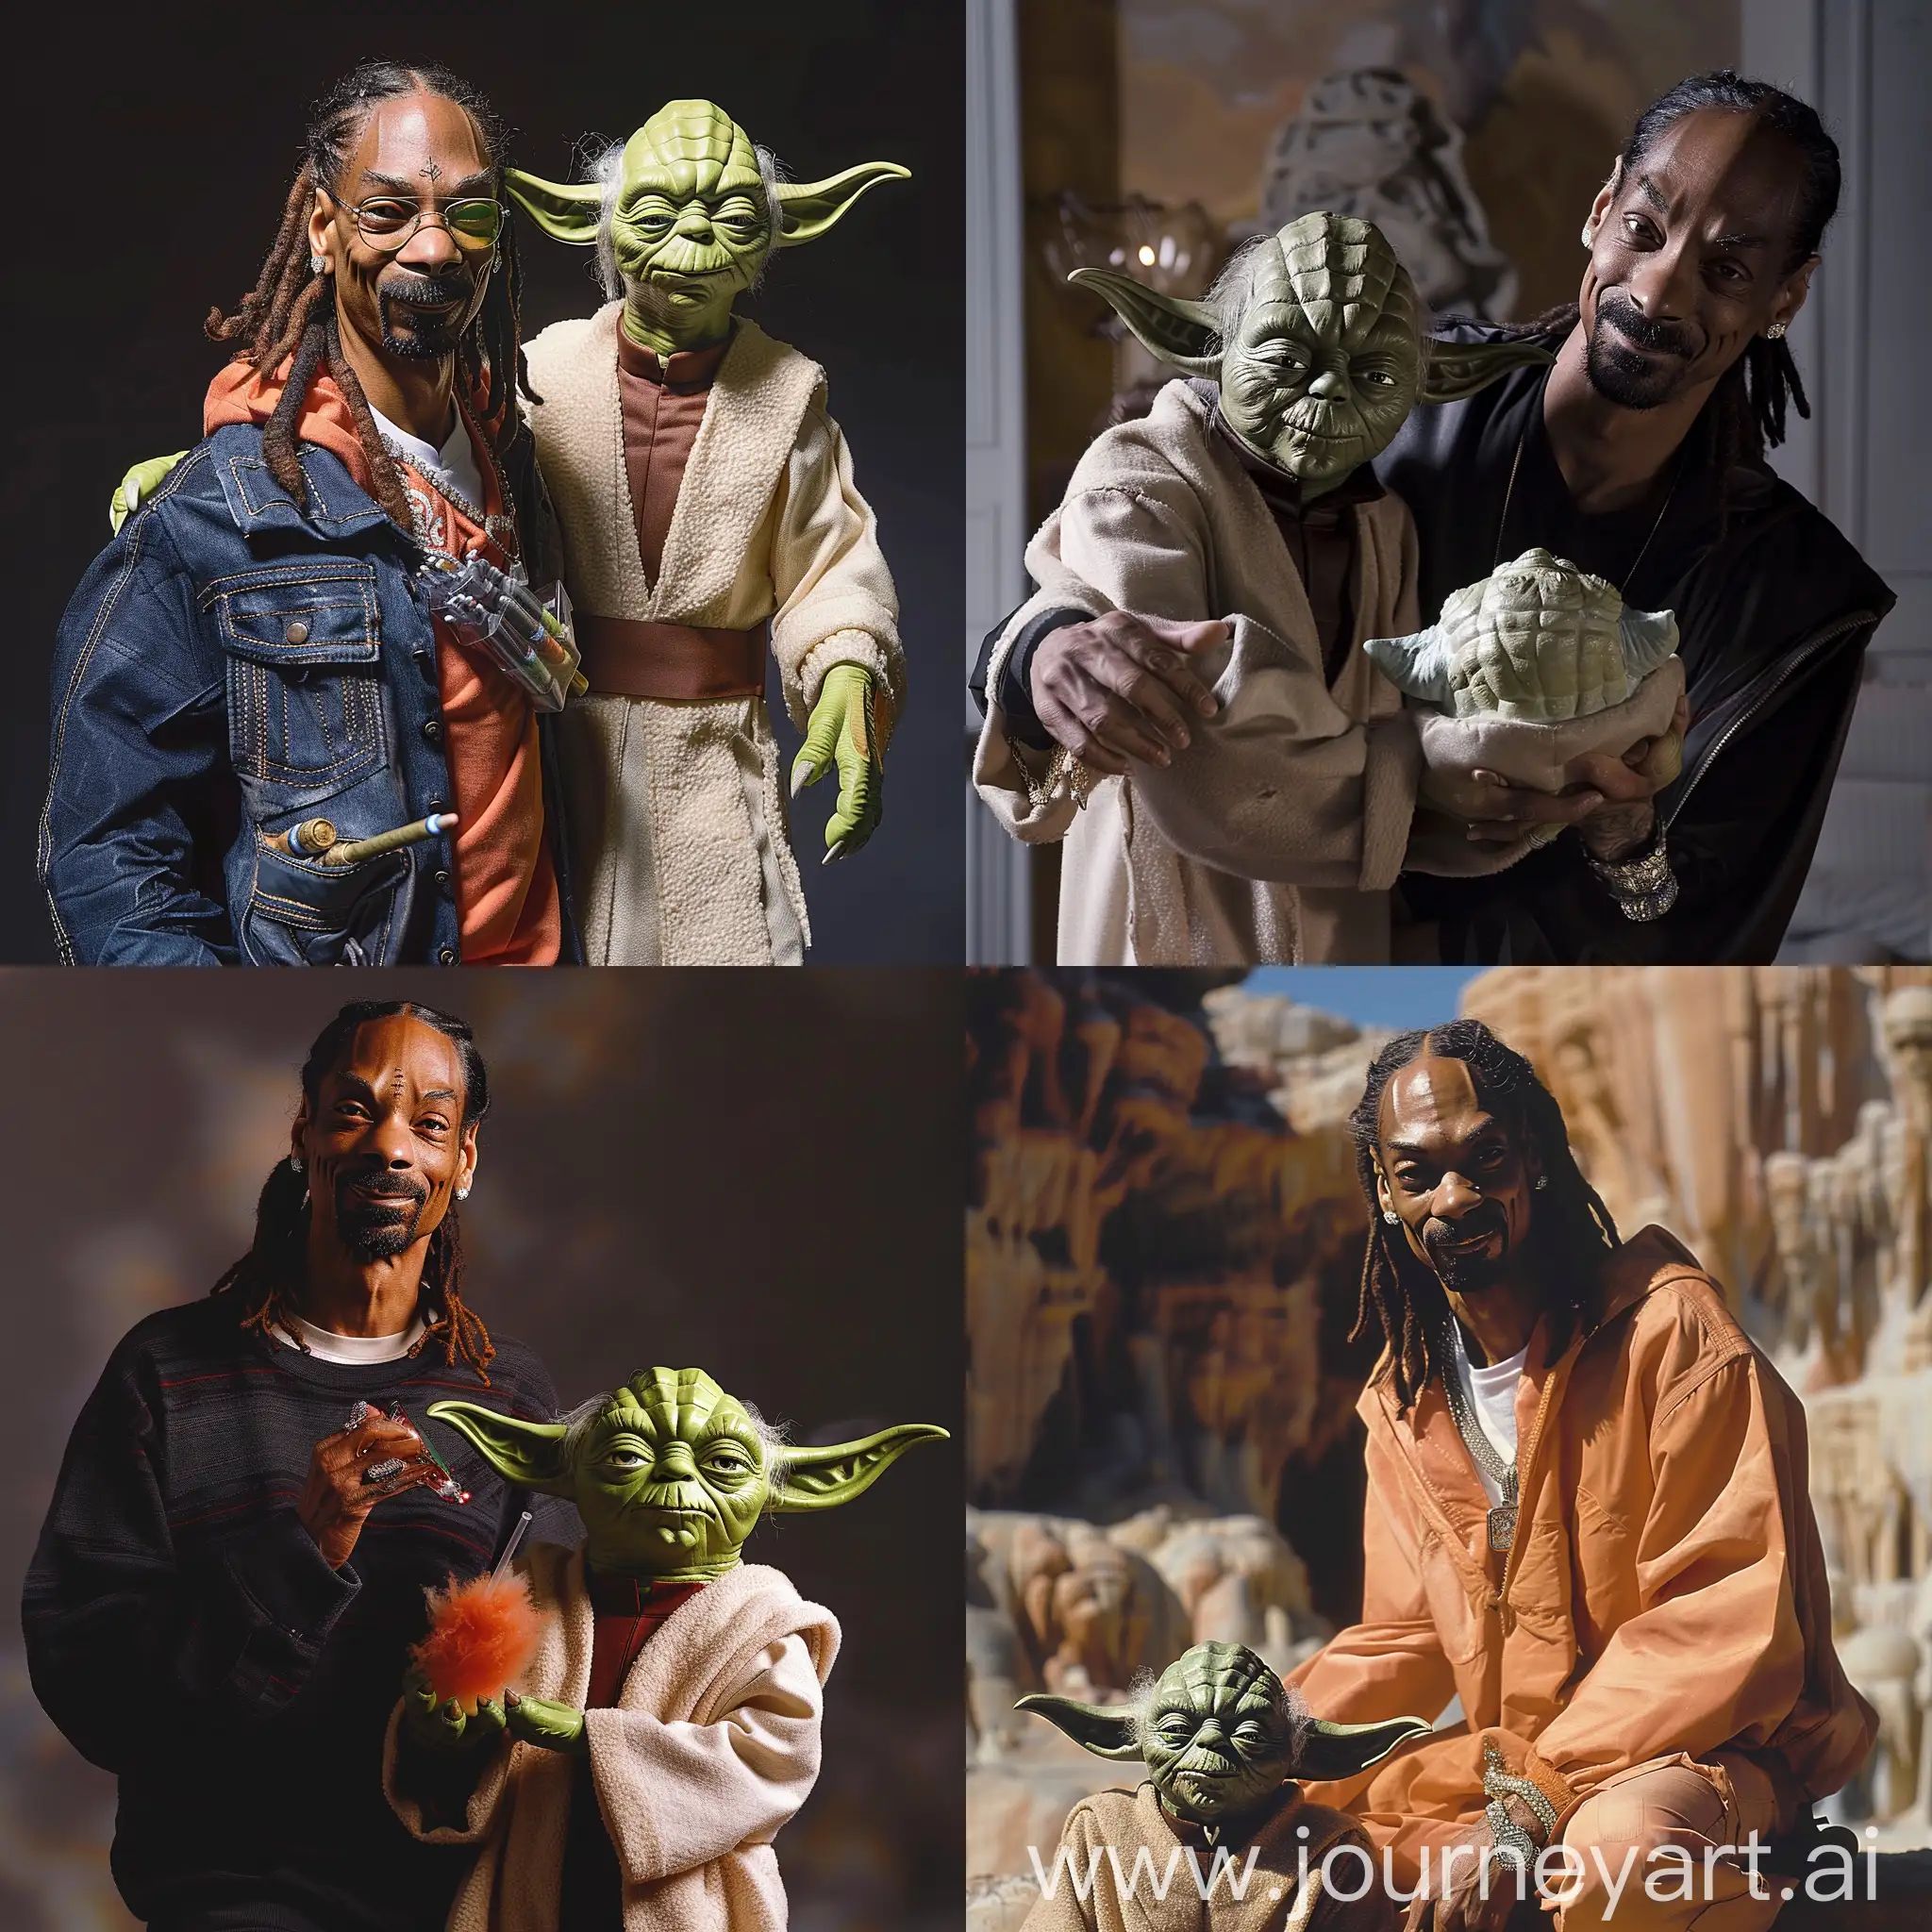 Snoop-Dogg-and-Yoda-Sharing-a-Cosmic-Moment